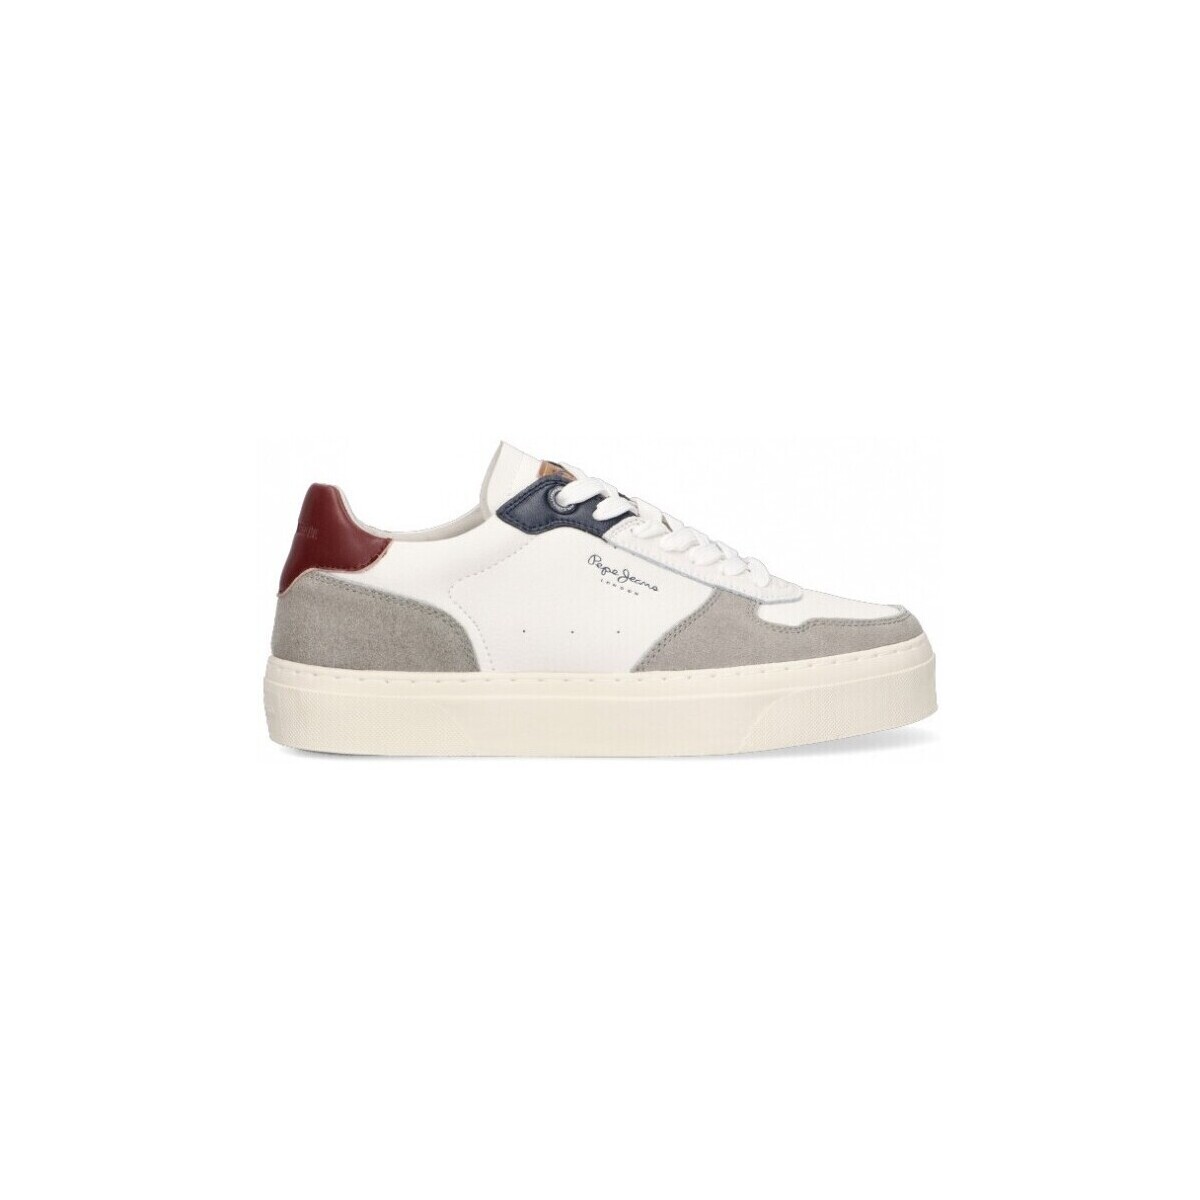 Pepe jeans  Sneakers Pepe jeans 70415